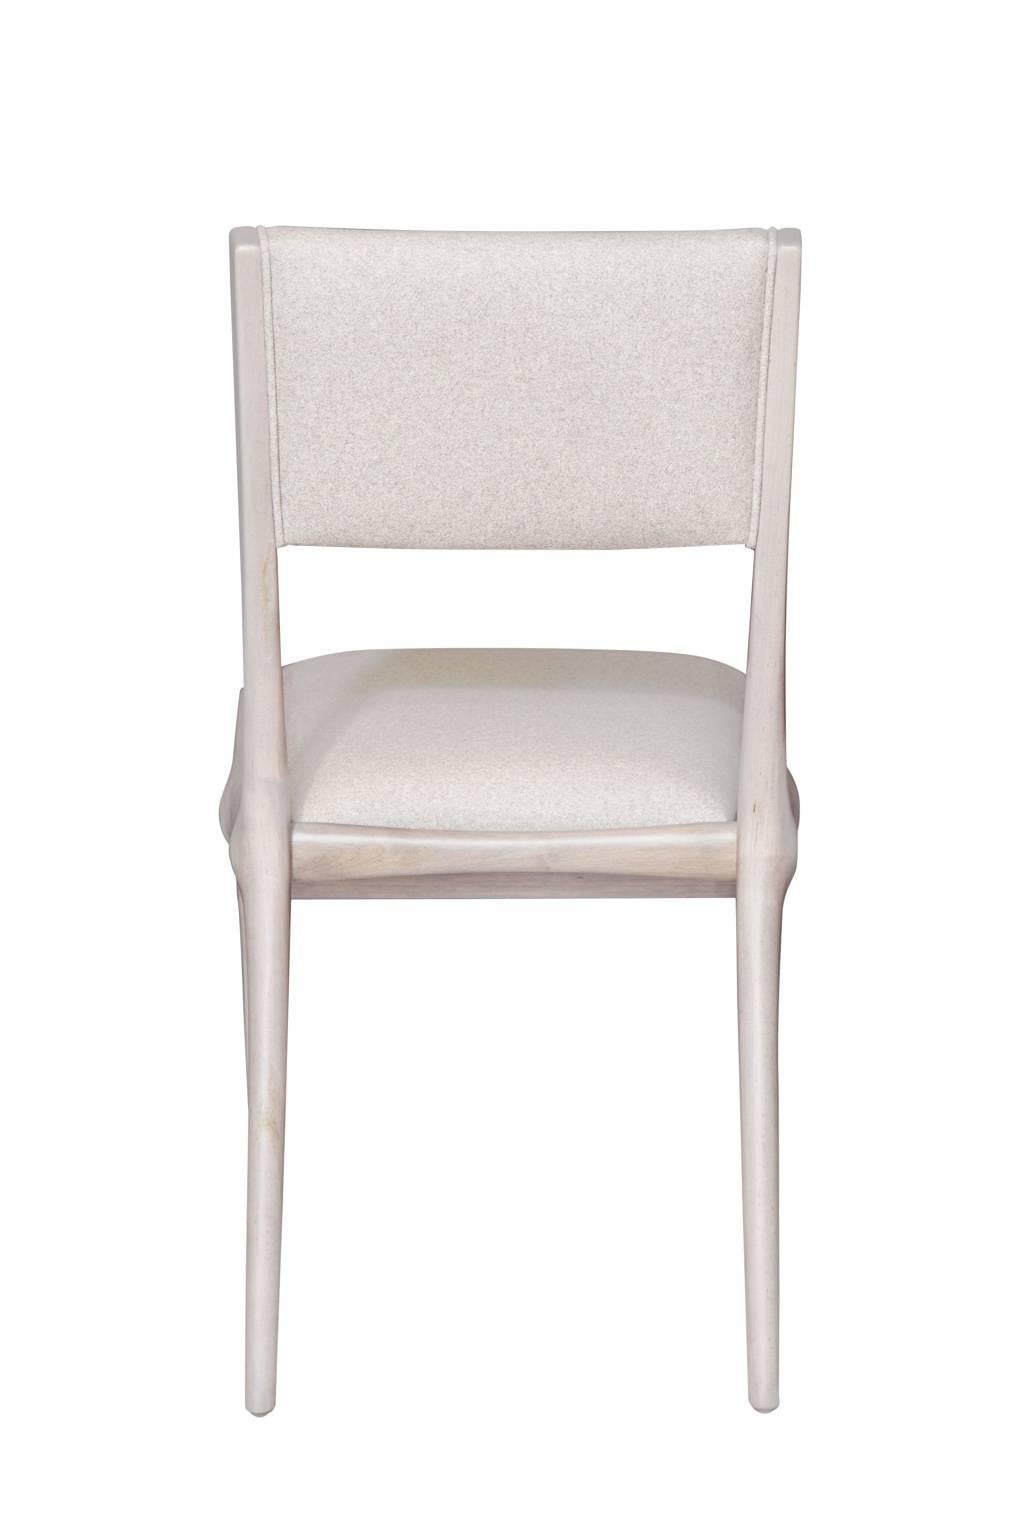 Boone Dining Chairs In Excellent Condition For Sale In New York, NY